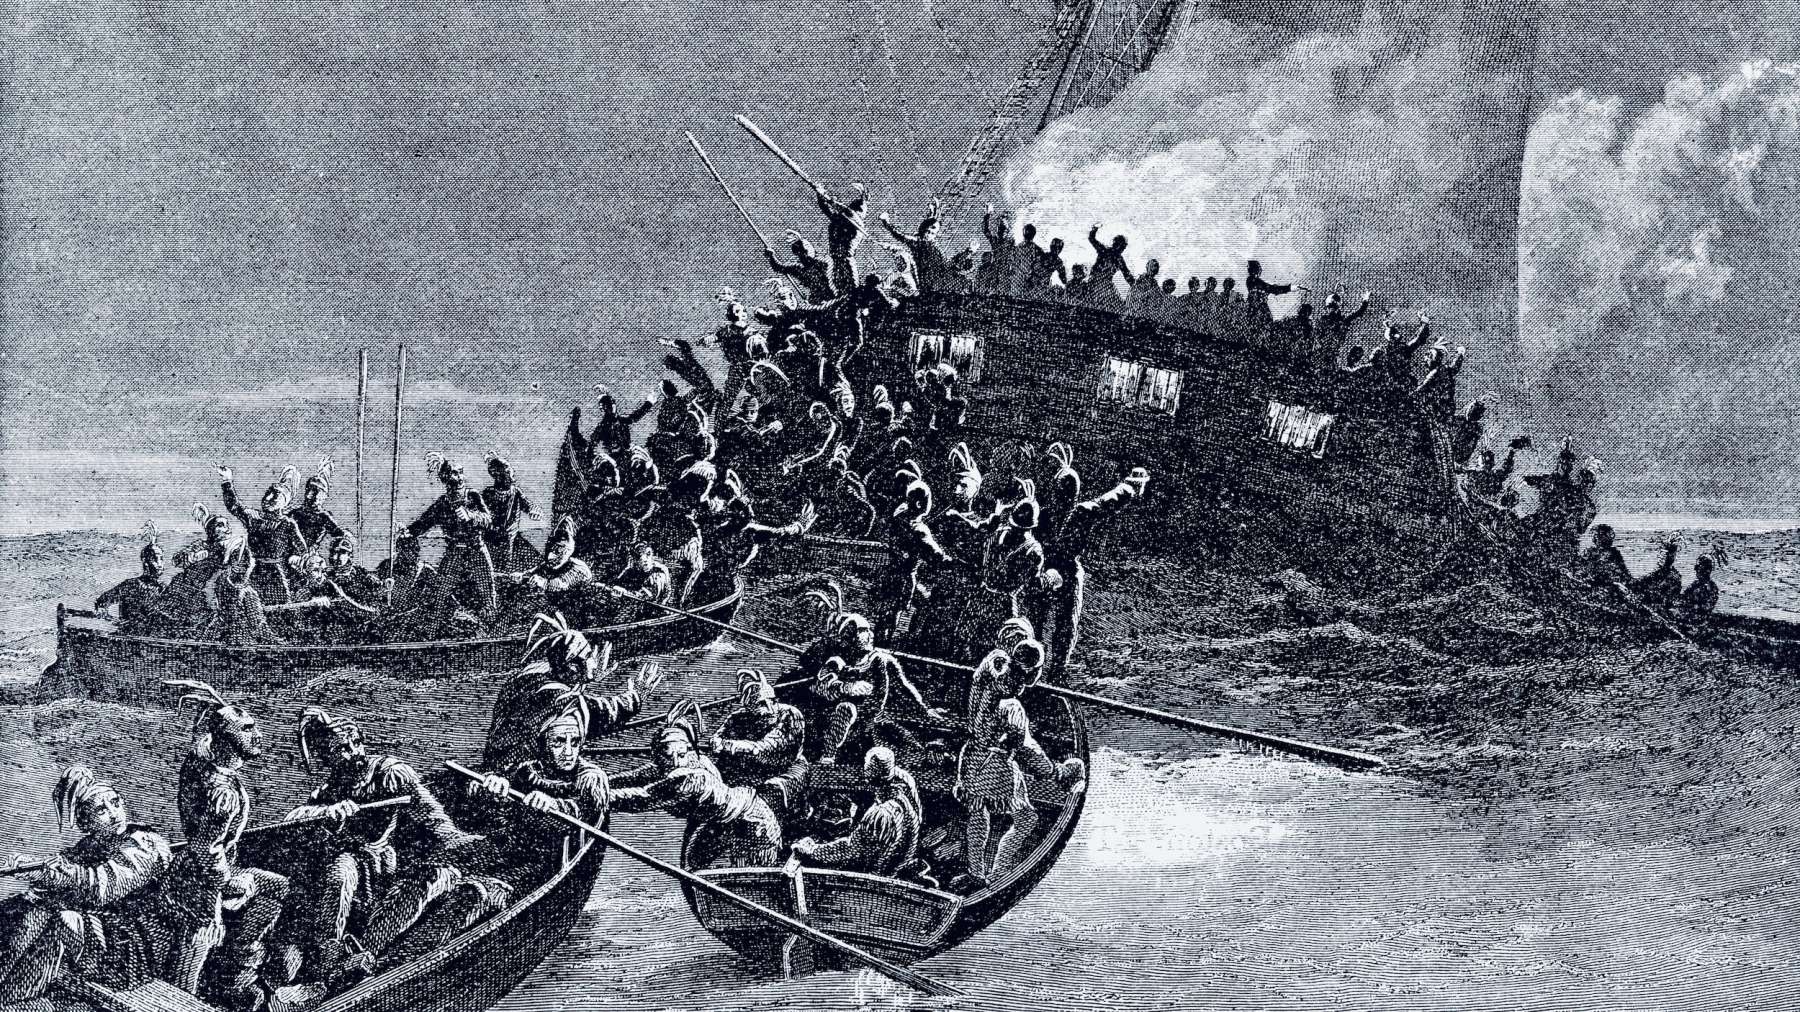 Rhode Island News: The Gaspee Affair was about the business of slavery